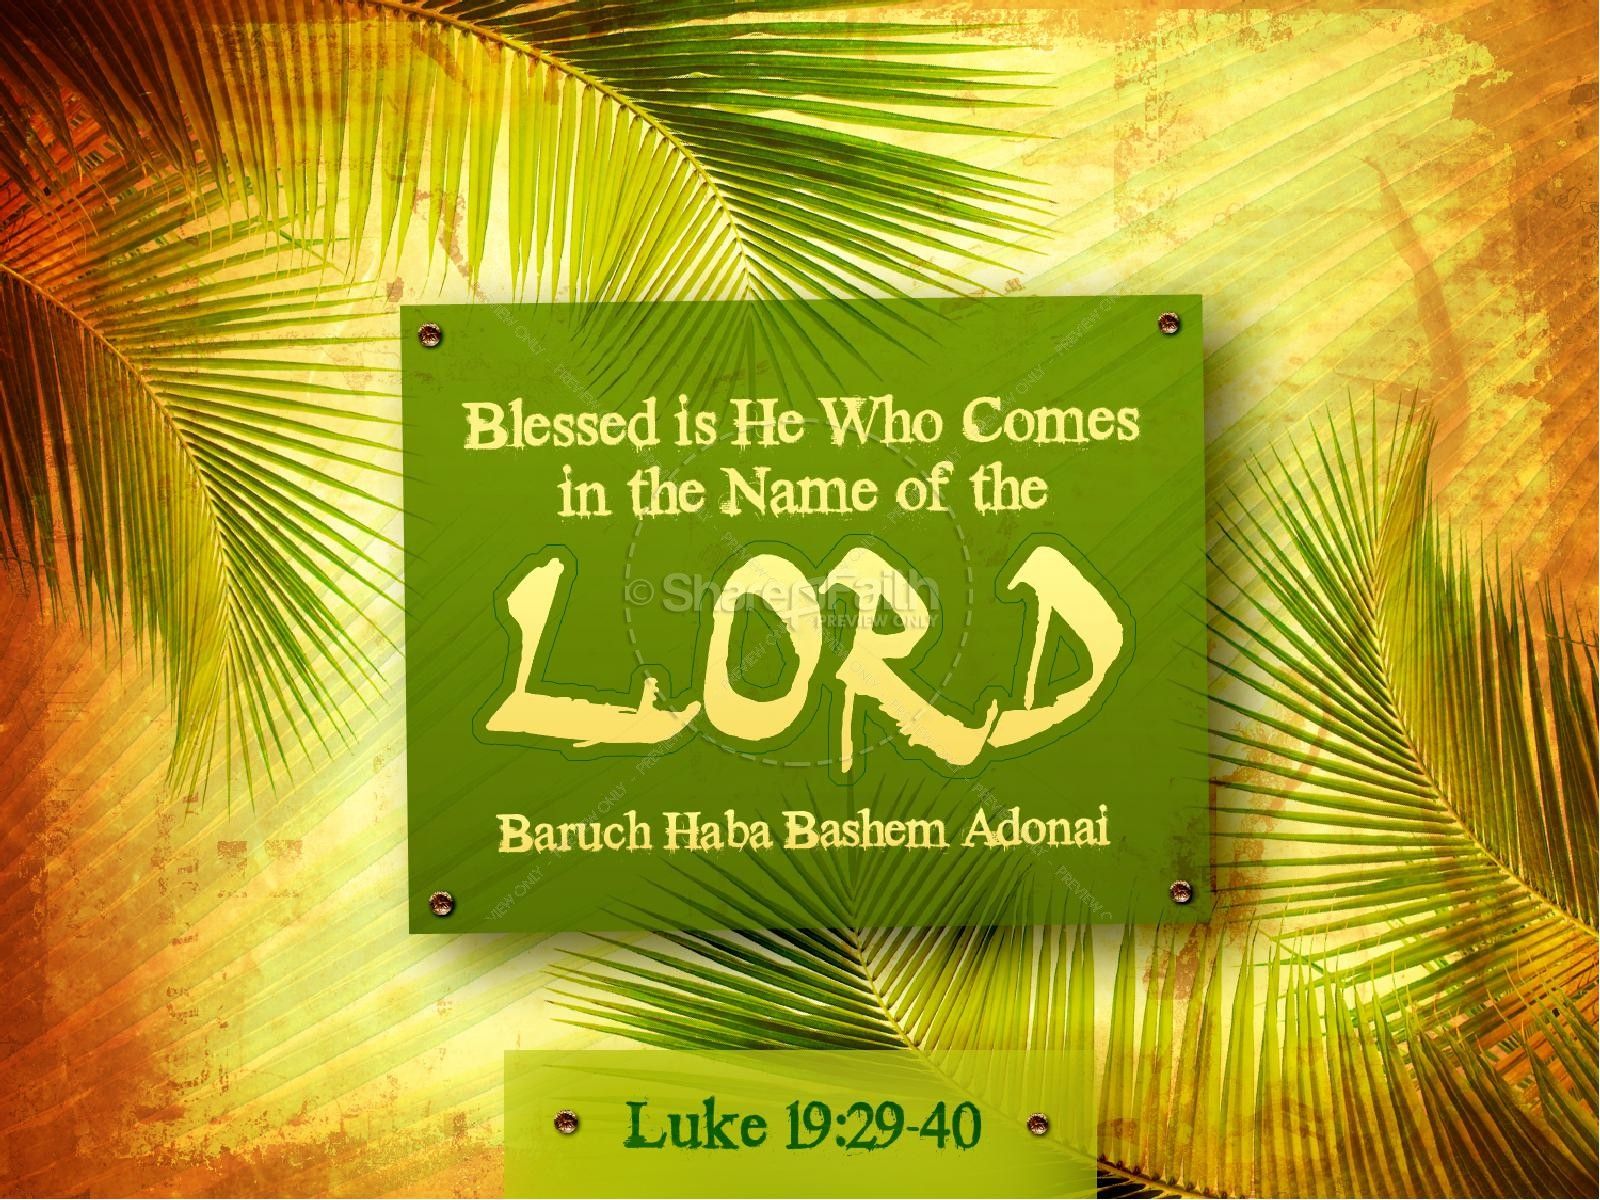 Palm Sunday Easter Passover PowerPoint. Easter Sunday Resurrection PowerPoints